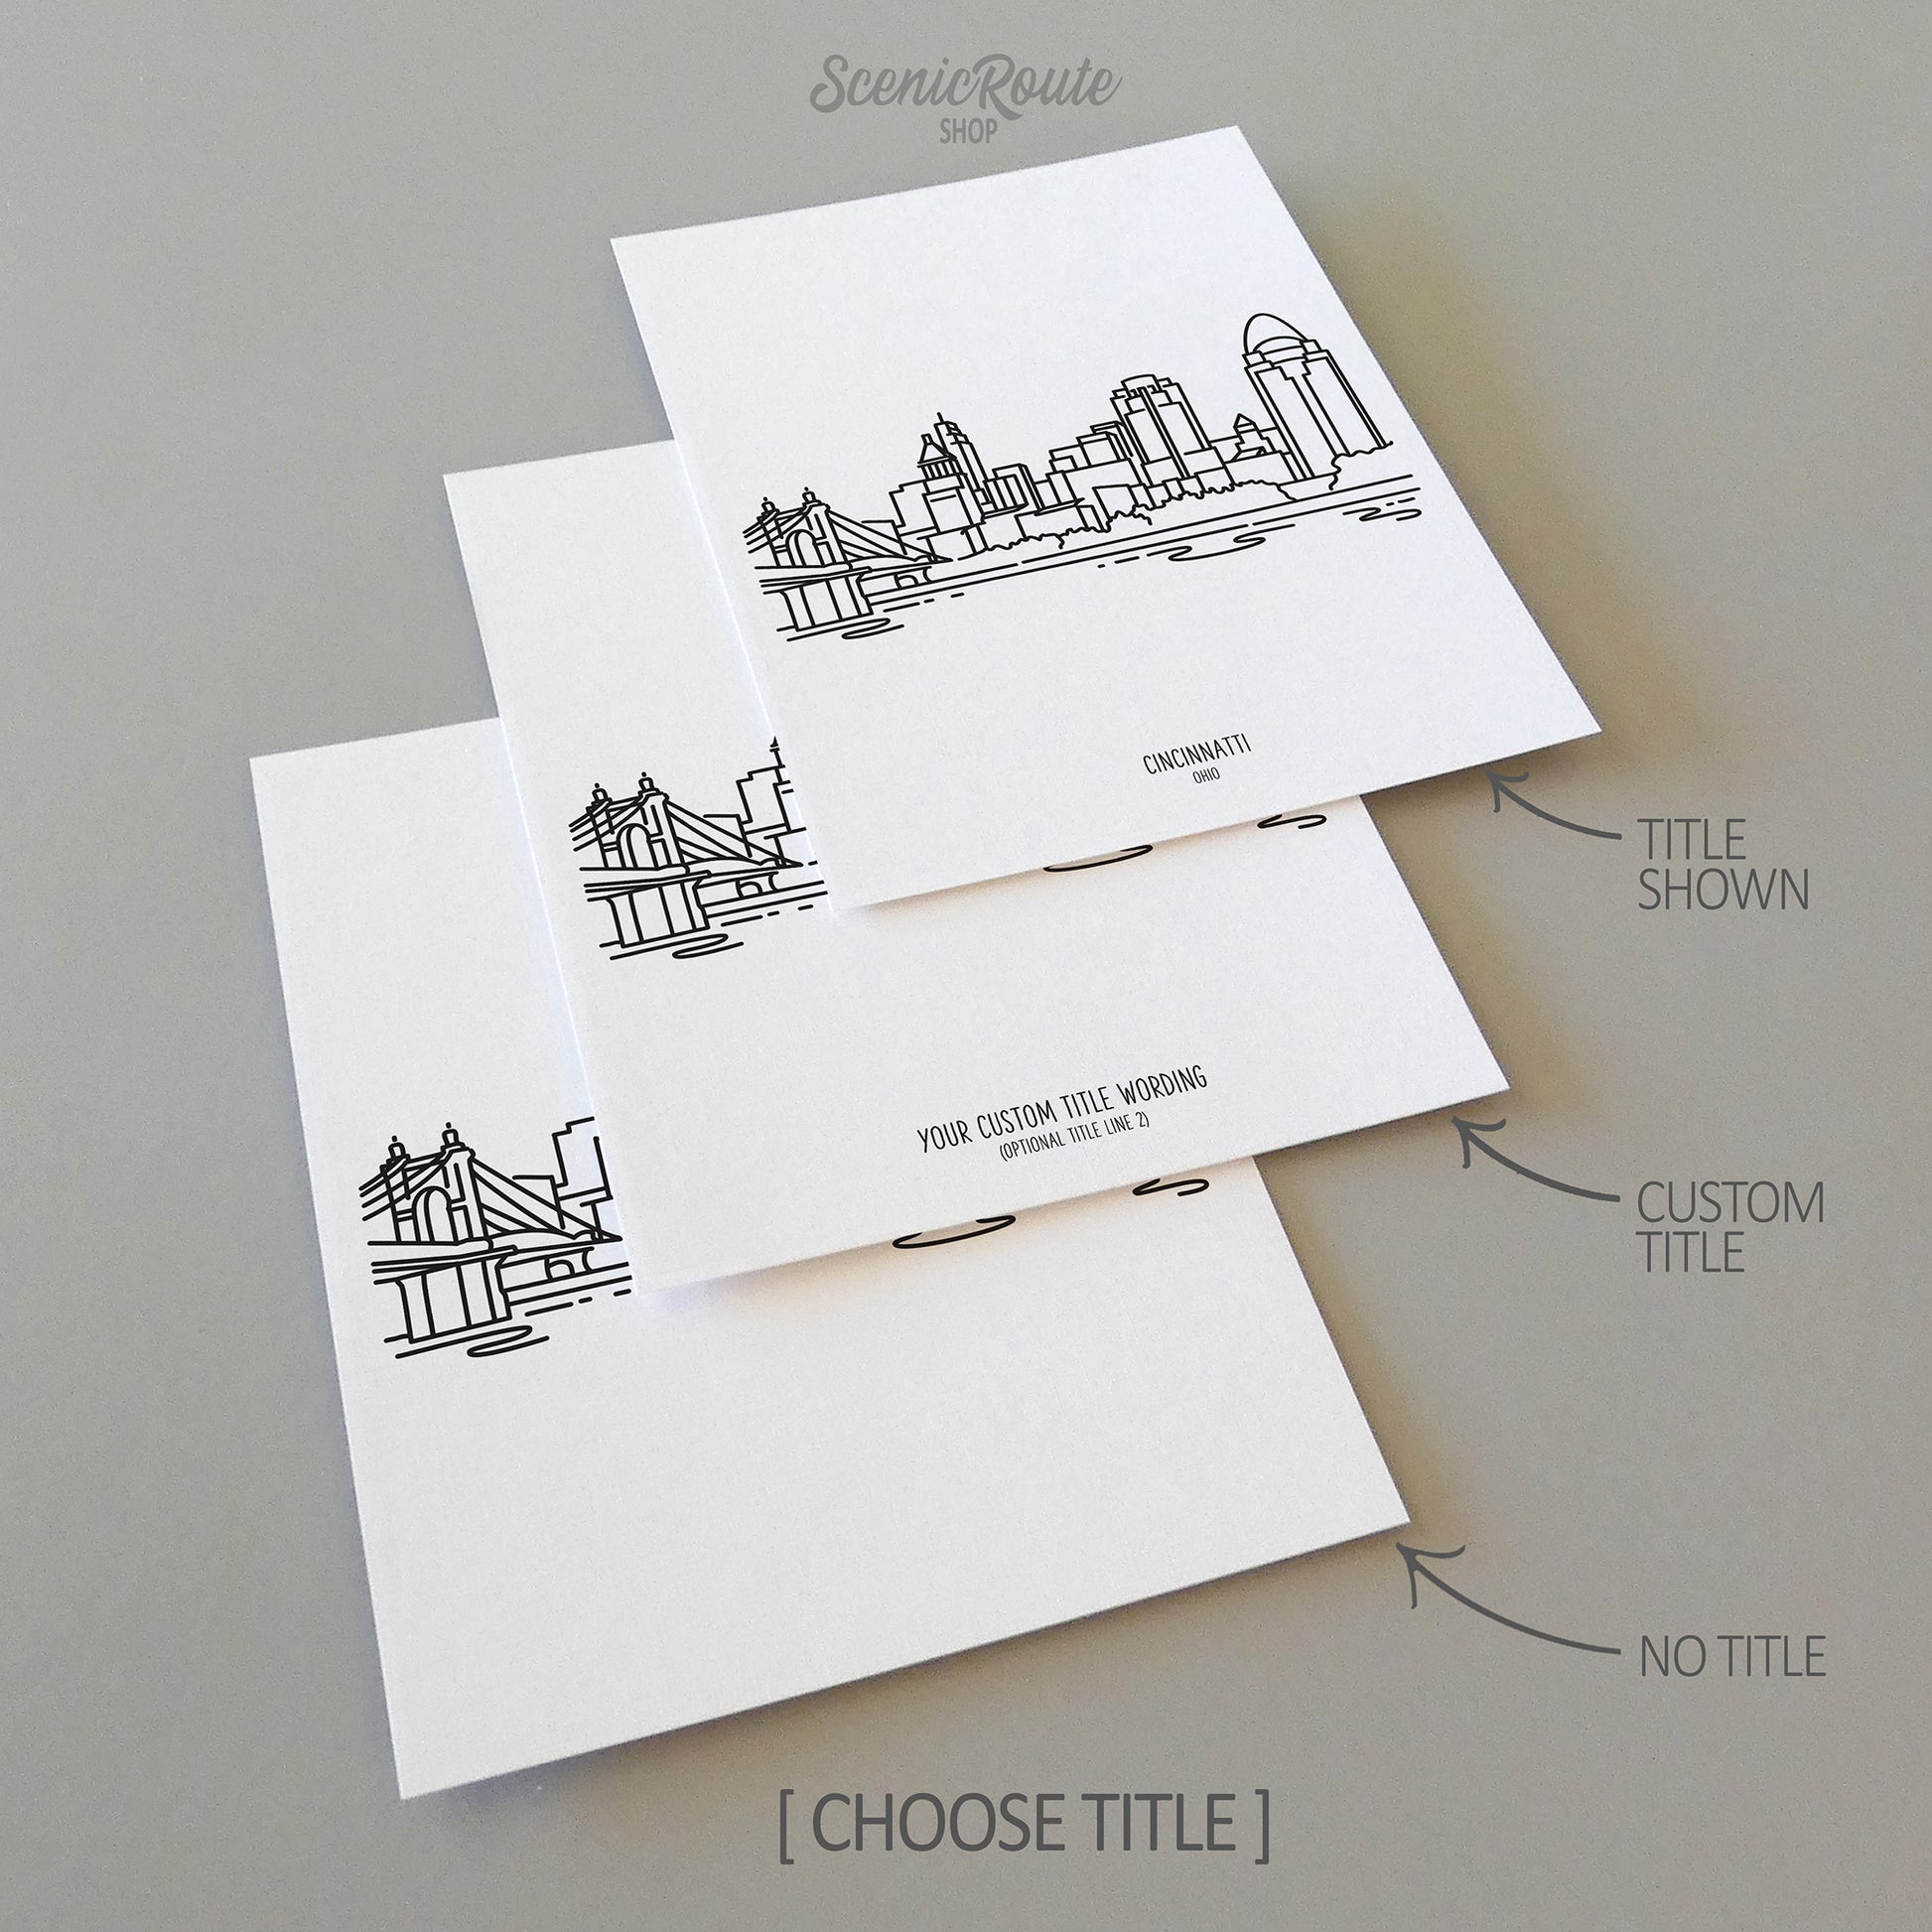 Three line art drawings of the Cincinnati Ohio Skyline on white linen paper with a gray background. The pieces are shown with title options that can be chosen and personalized.